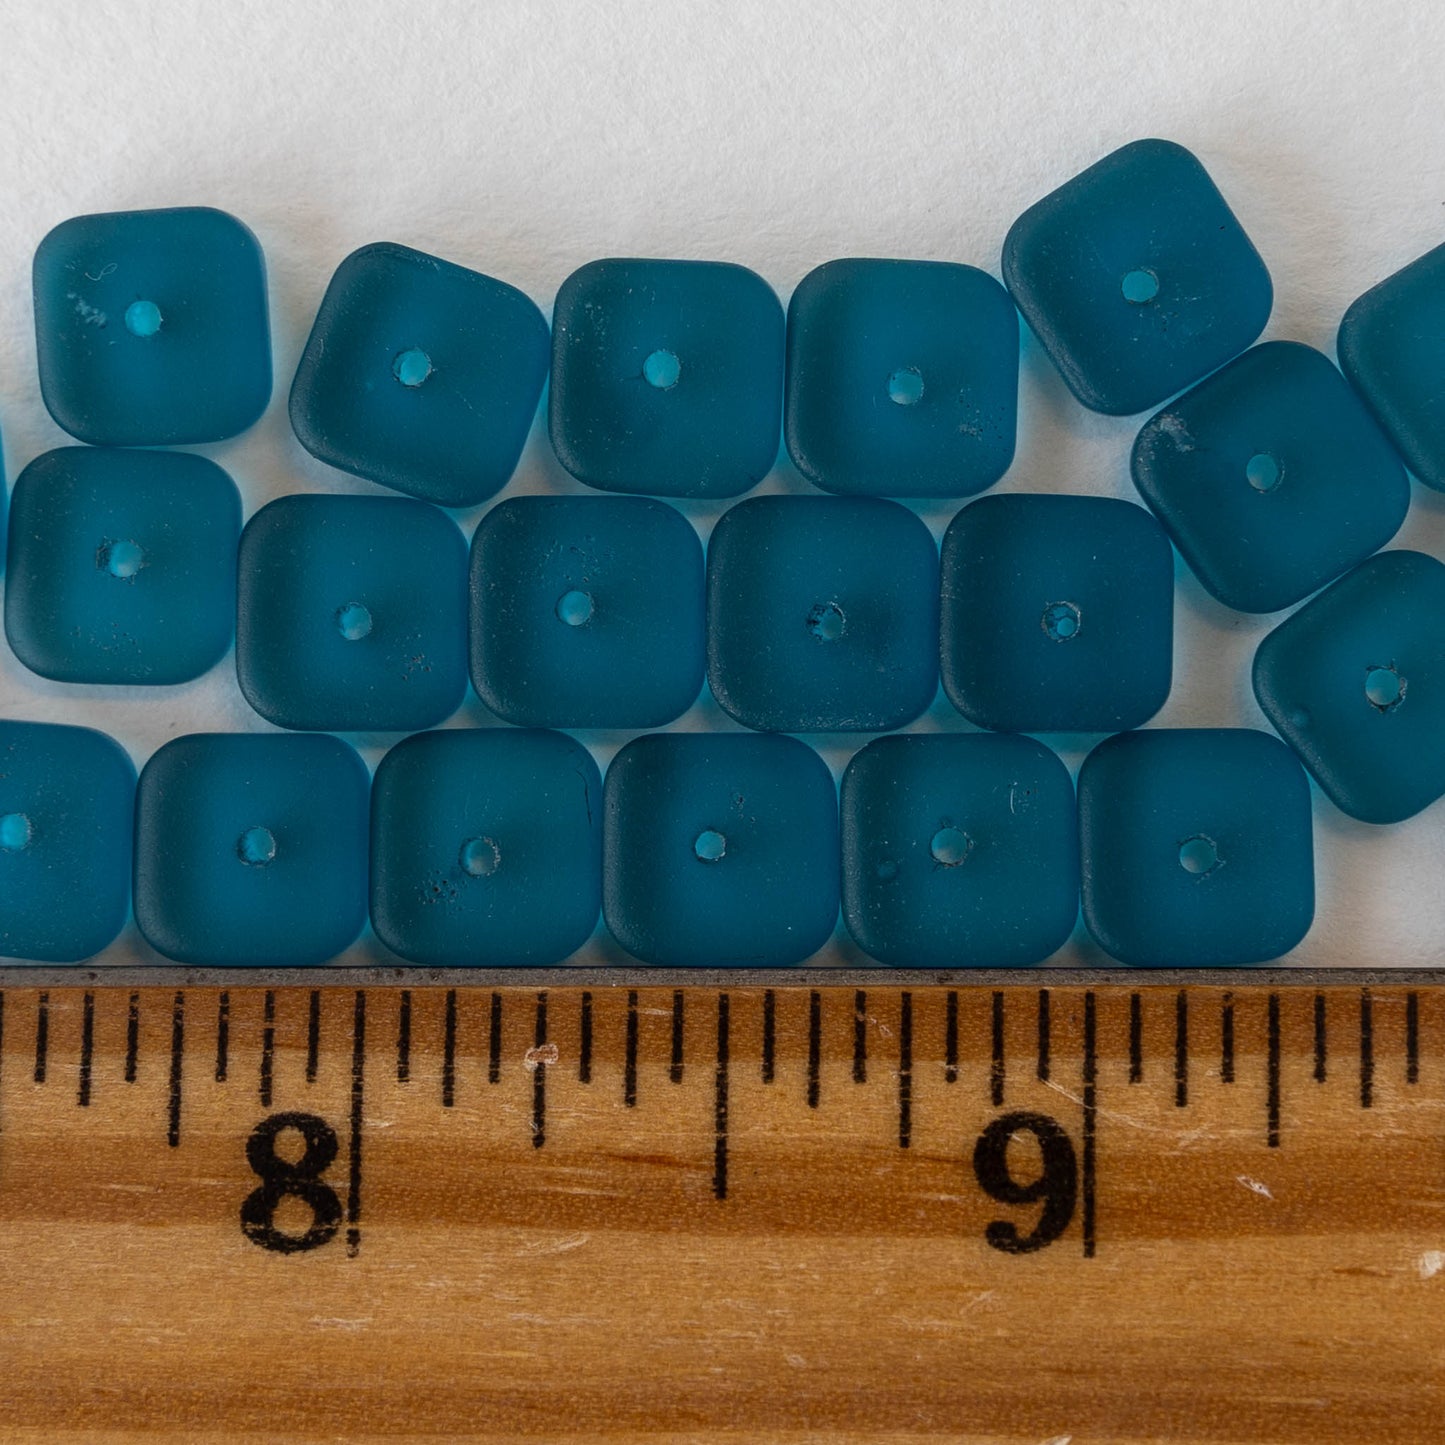 9mm Square Heishi Beads - Teal - 25 Beads